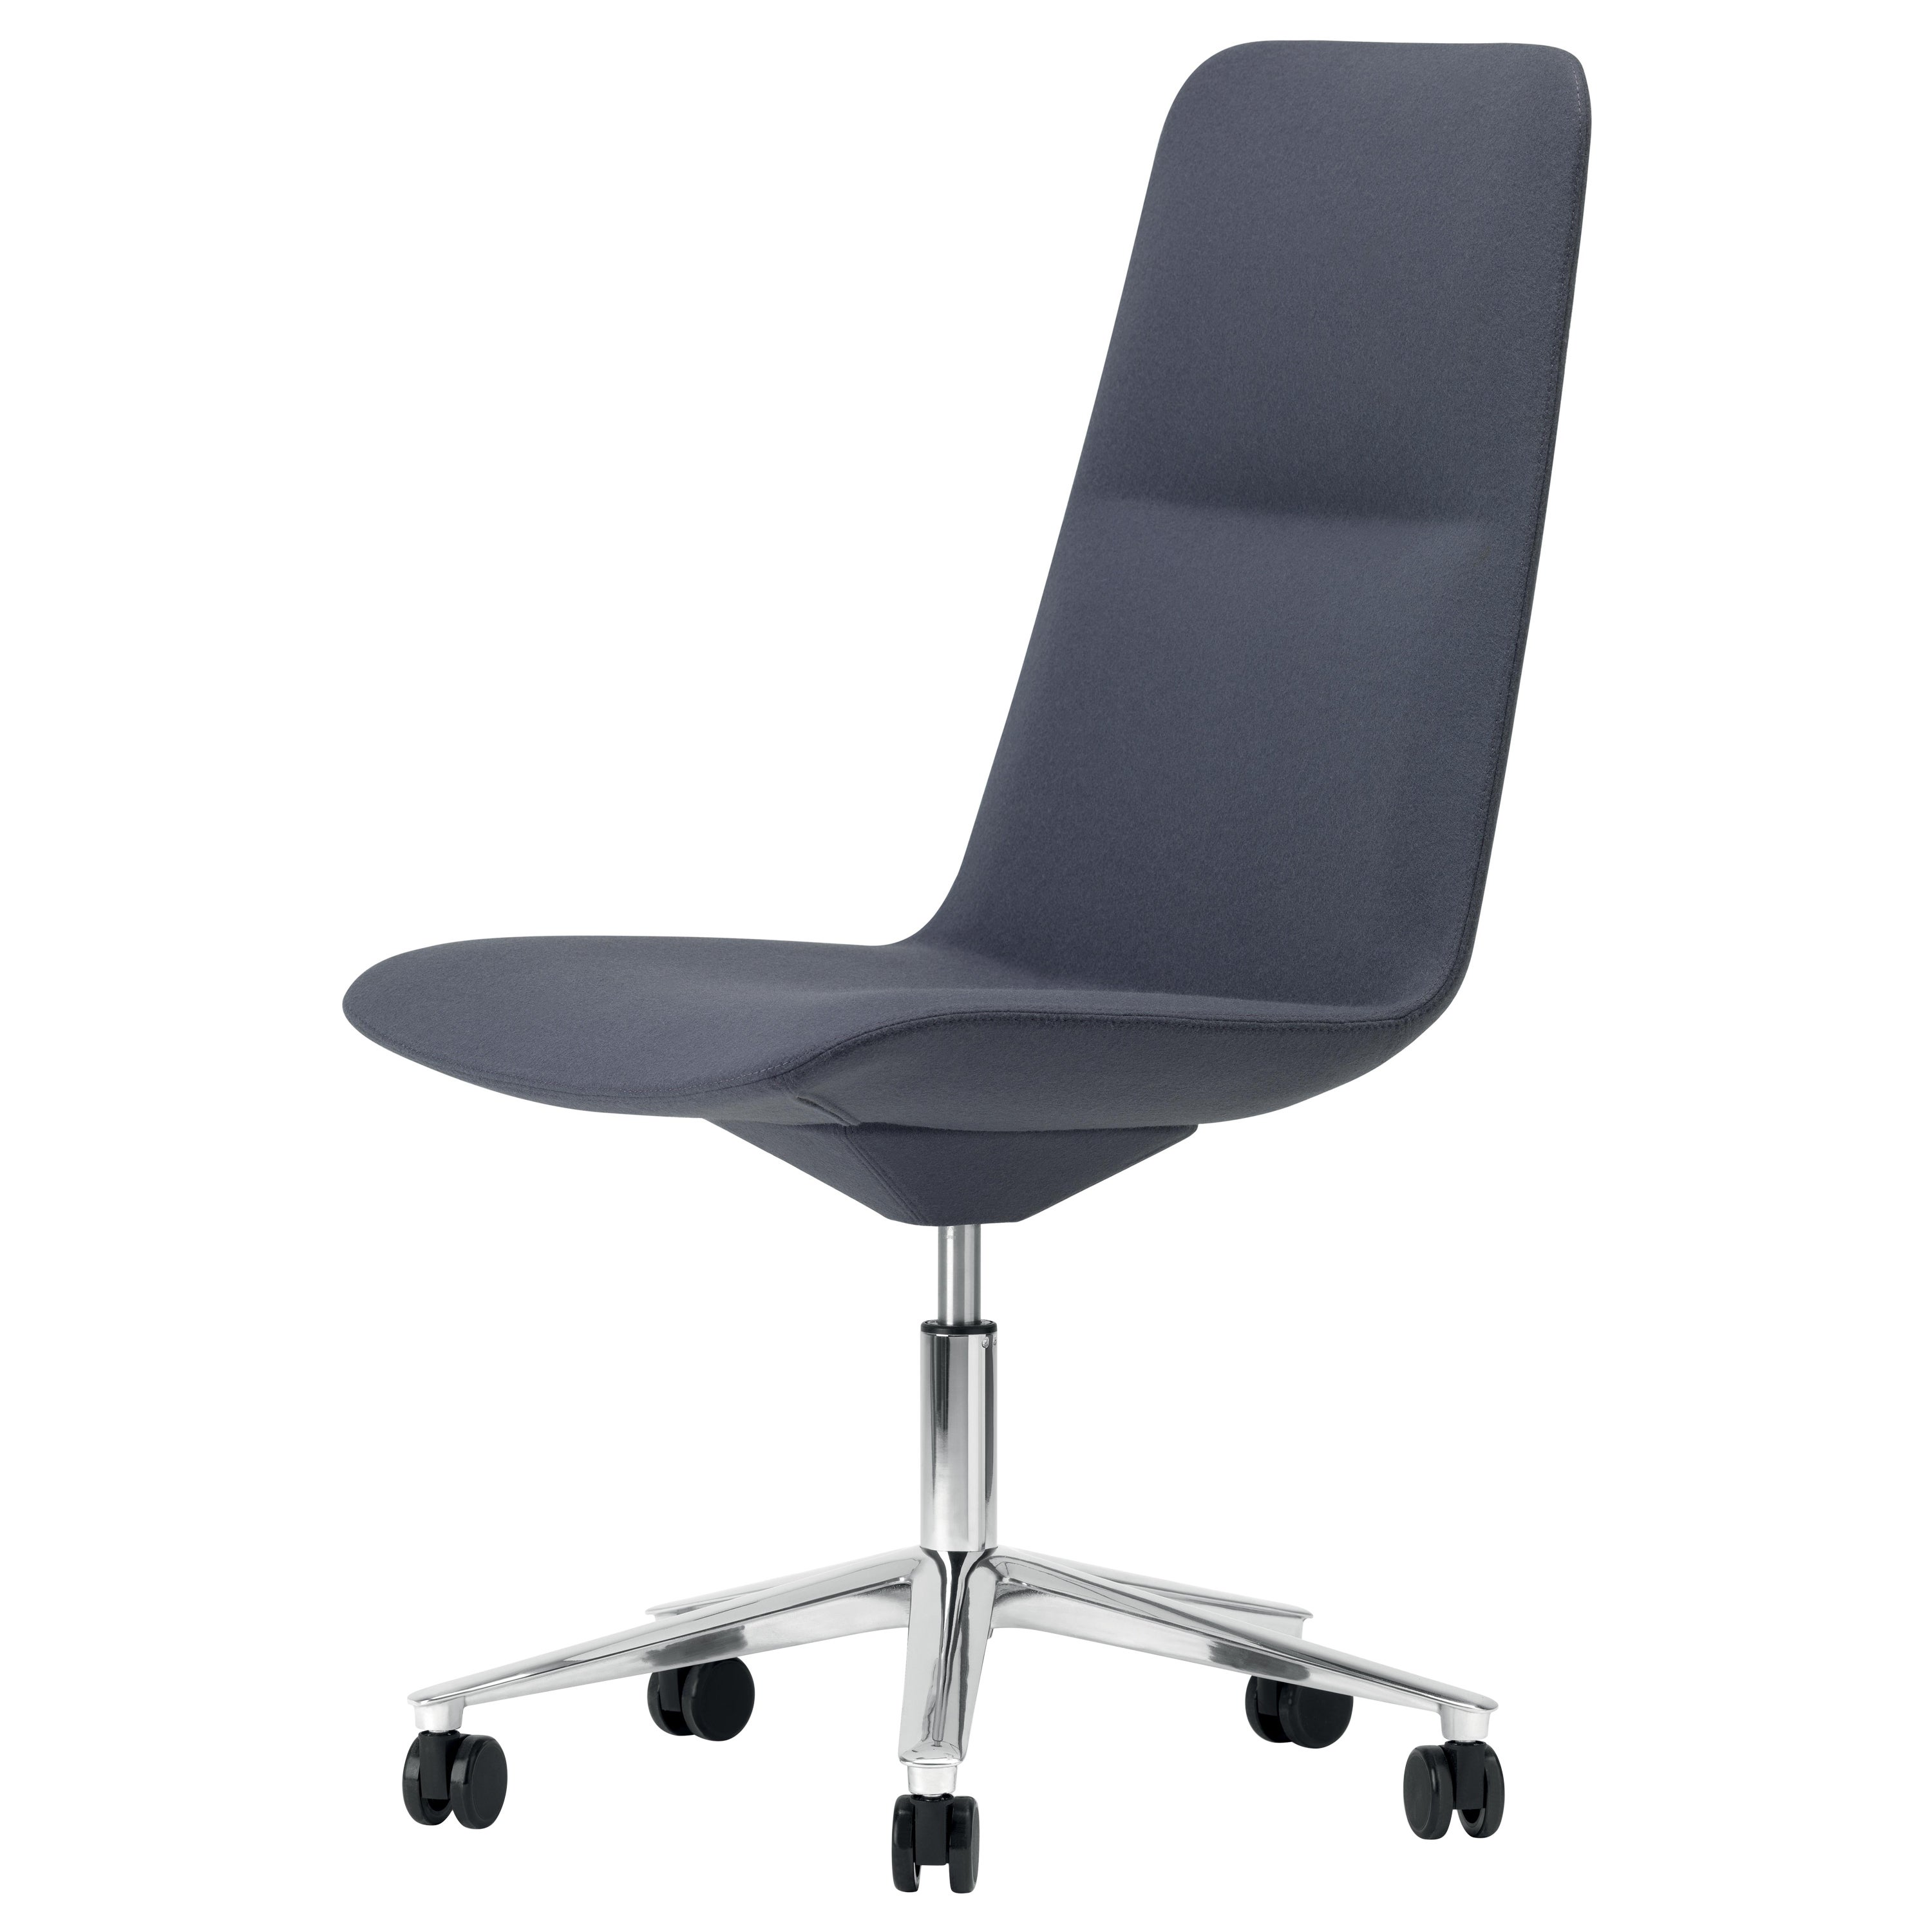 Alias 825 Slim Conference High 5 Chair with Upholstered Seat and Chromed Frame For Sale